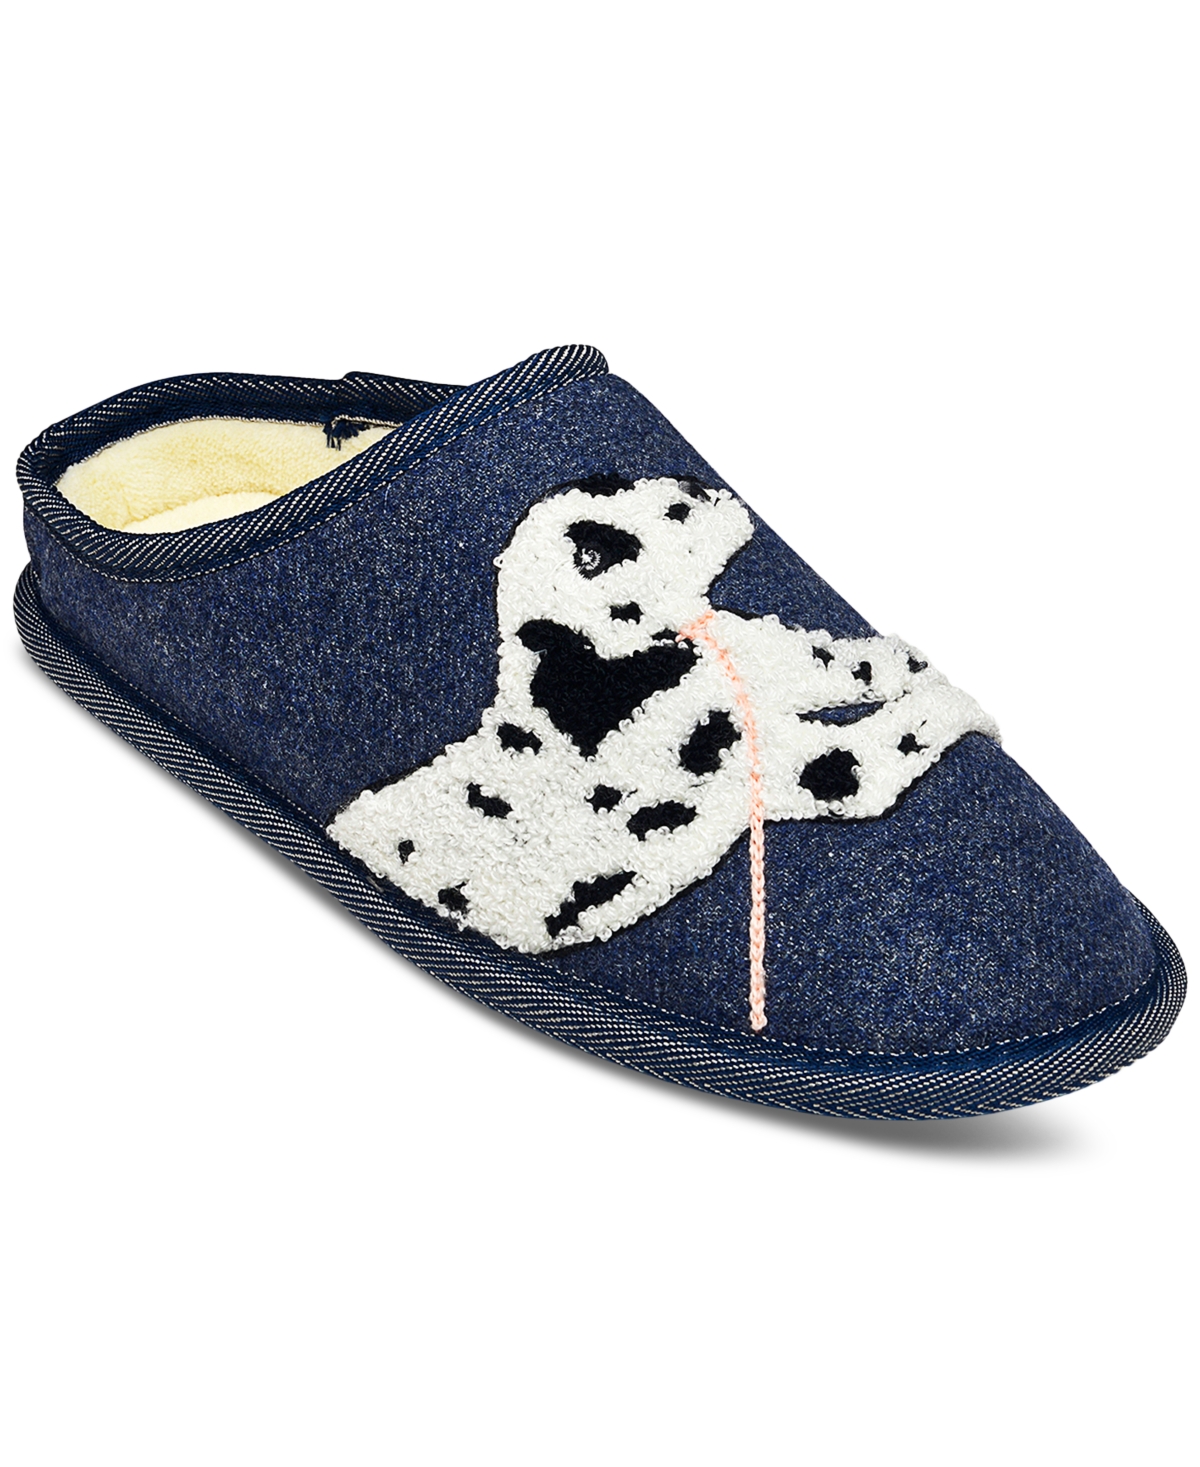 Women's Radley & Friends Embroidered Slippers - Dalmatian, Navy